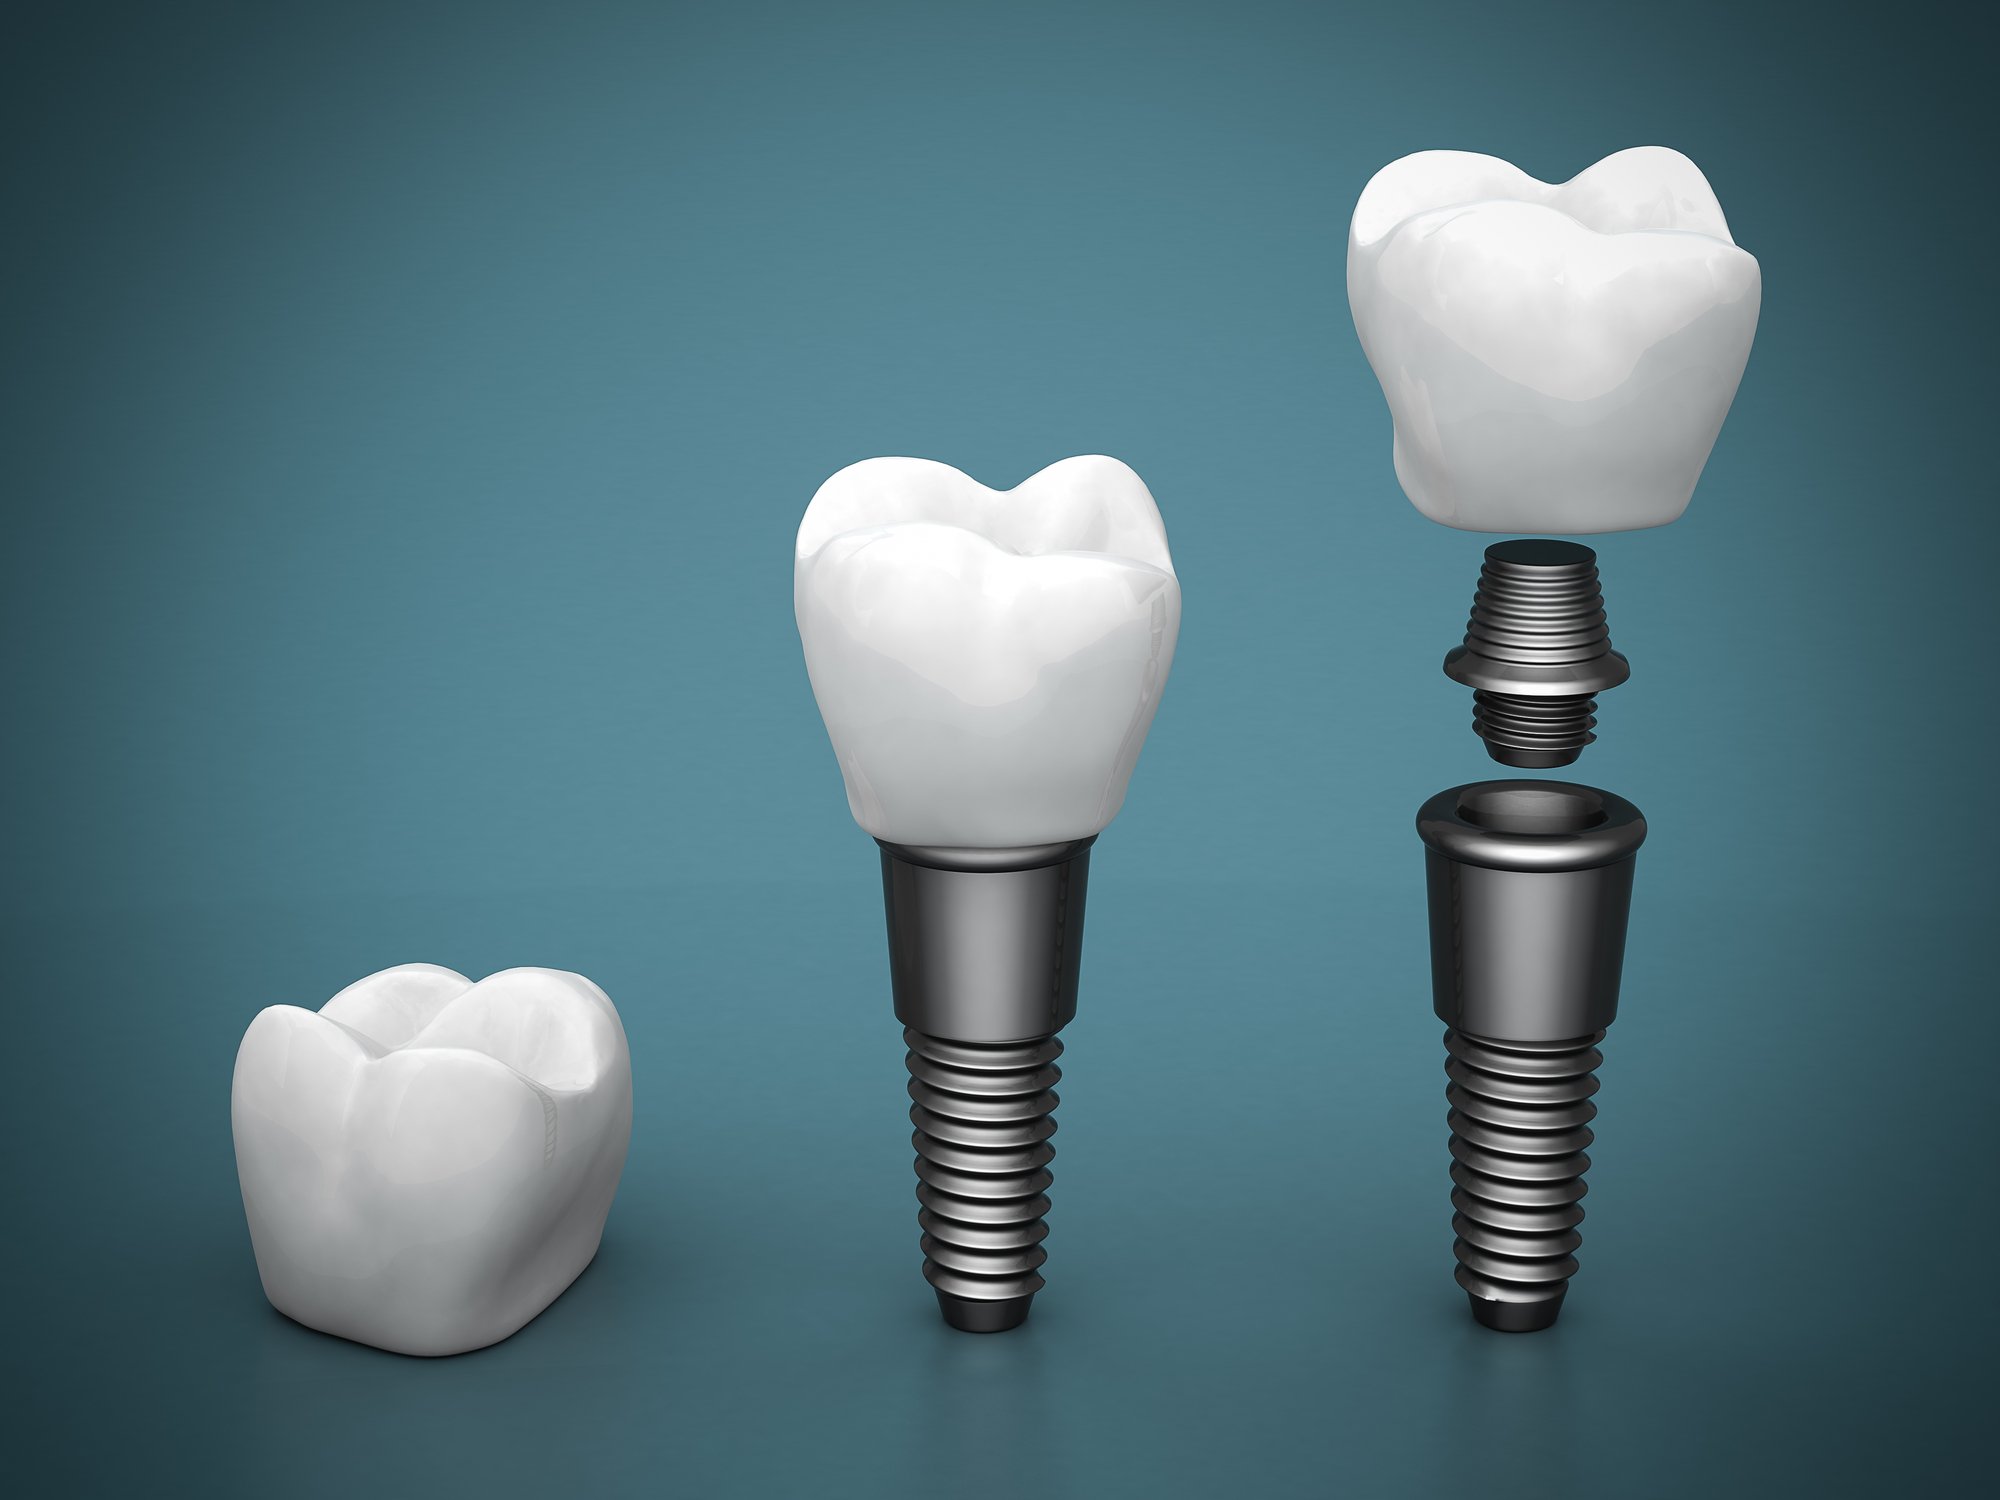 3D illustration of how crowns for teeth sit on a dental implant